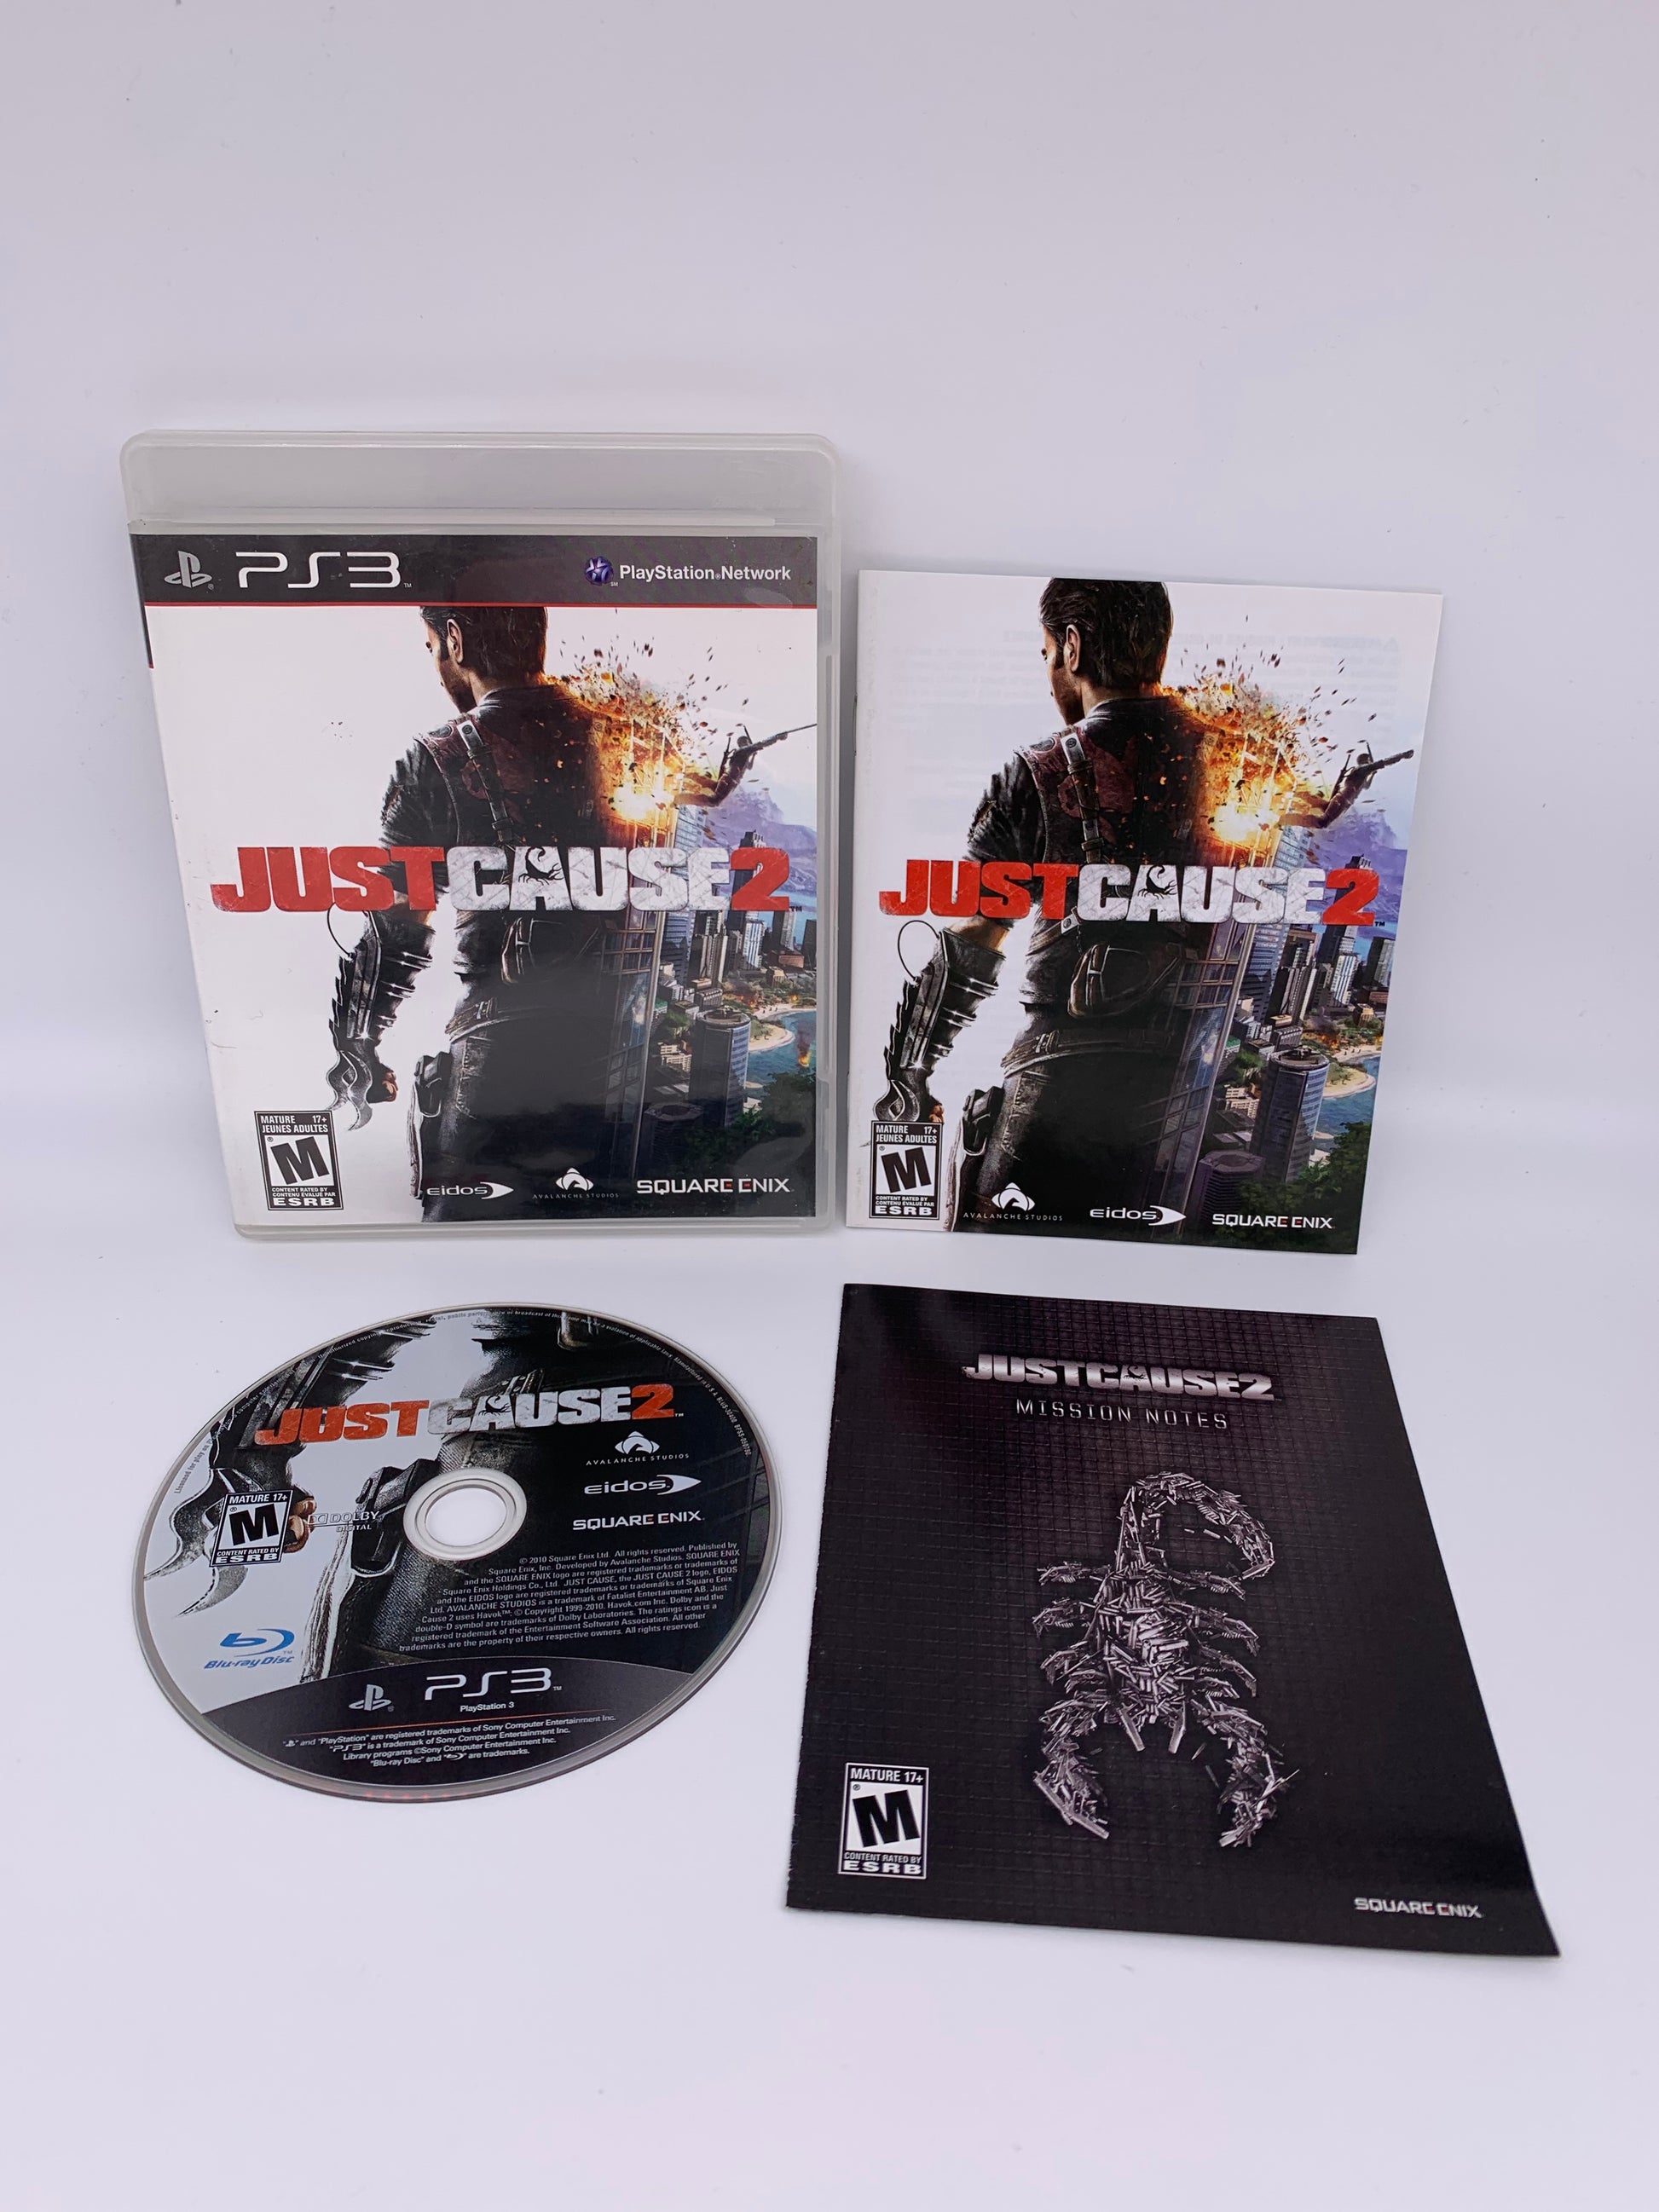 PiXEL-RETRO.COM : SONY PLAYSTATION 3 (PS3) COMPLET CIB BOX MANUAL GAME NTSC JUST CAUSE 2